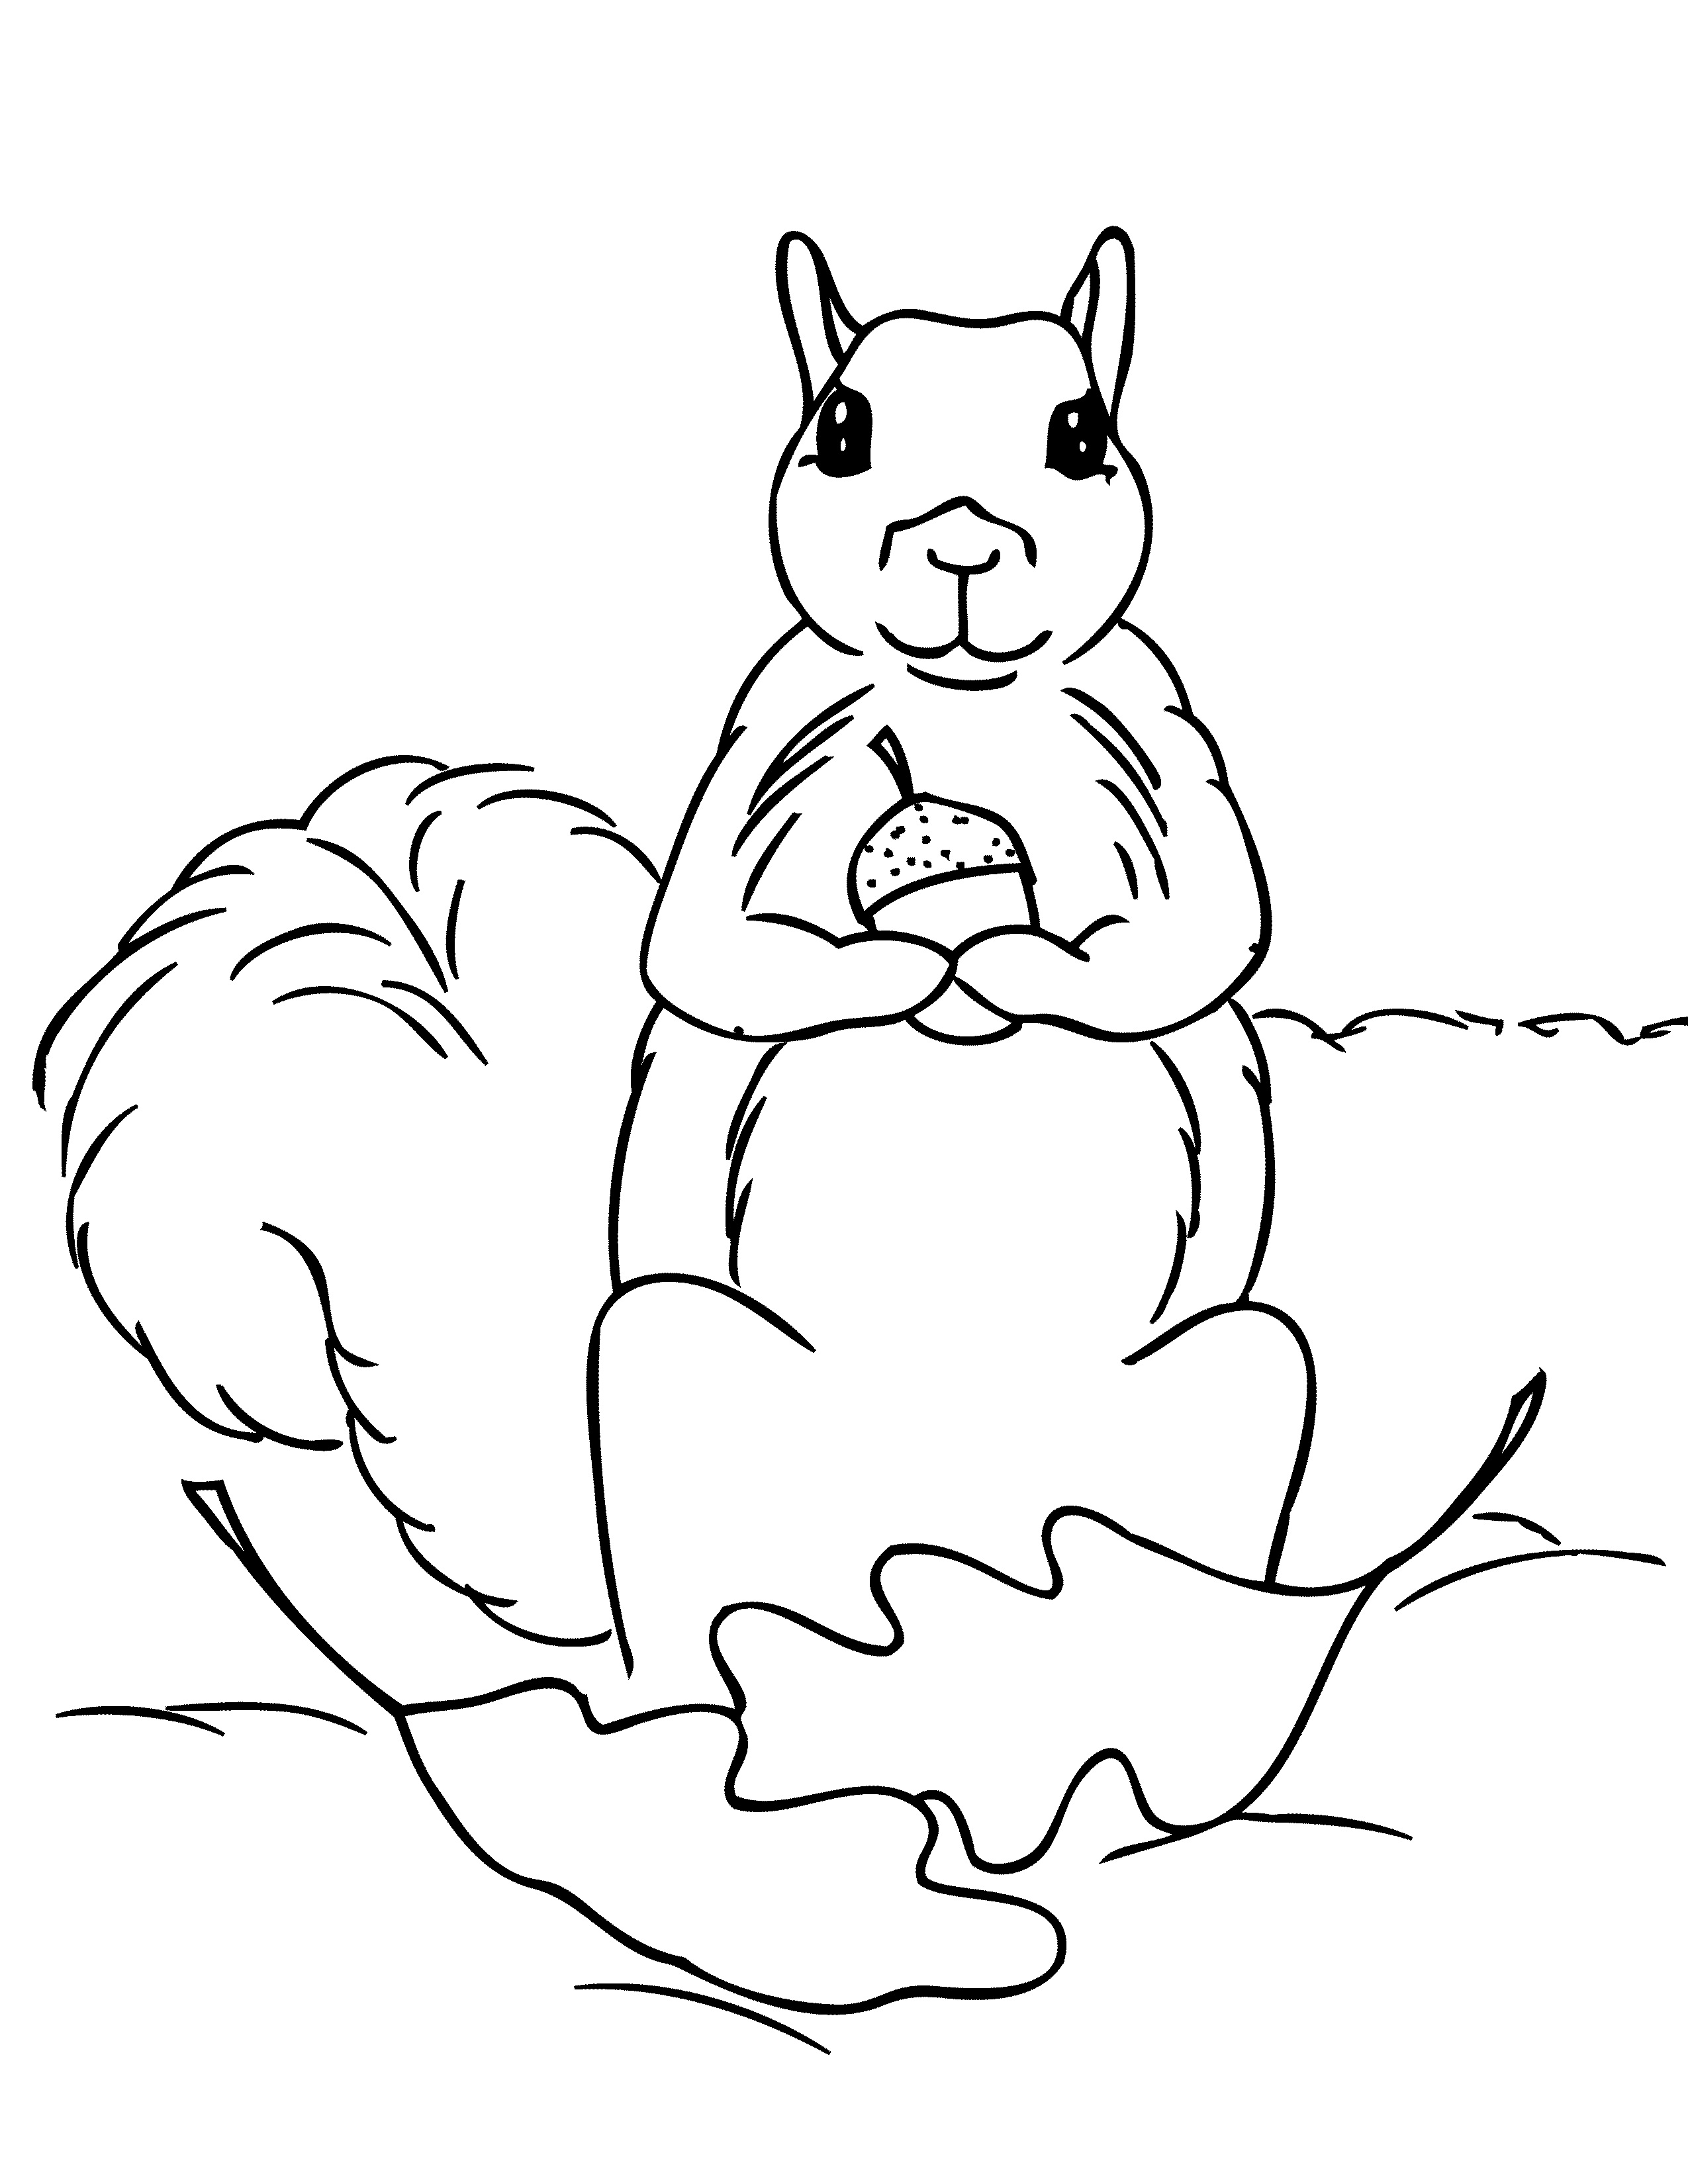 squirrel-coloring-page-photo-animal-place